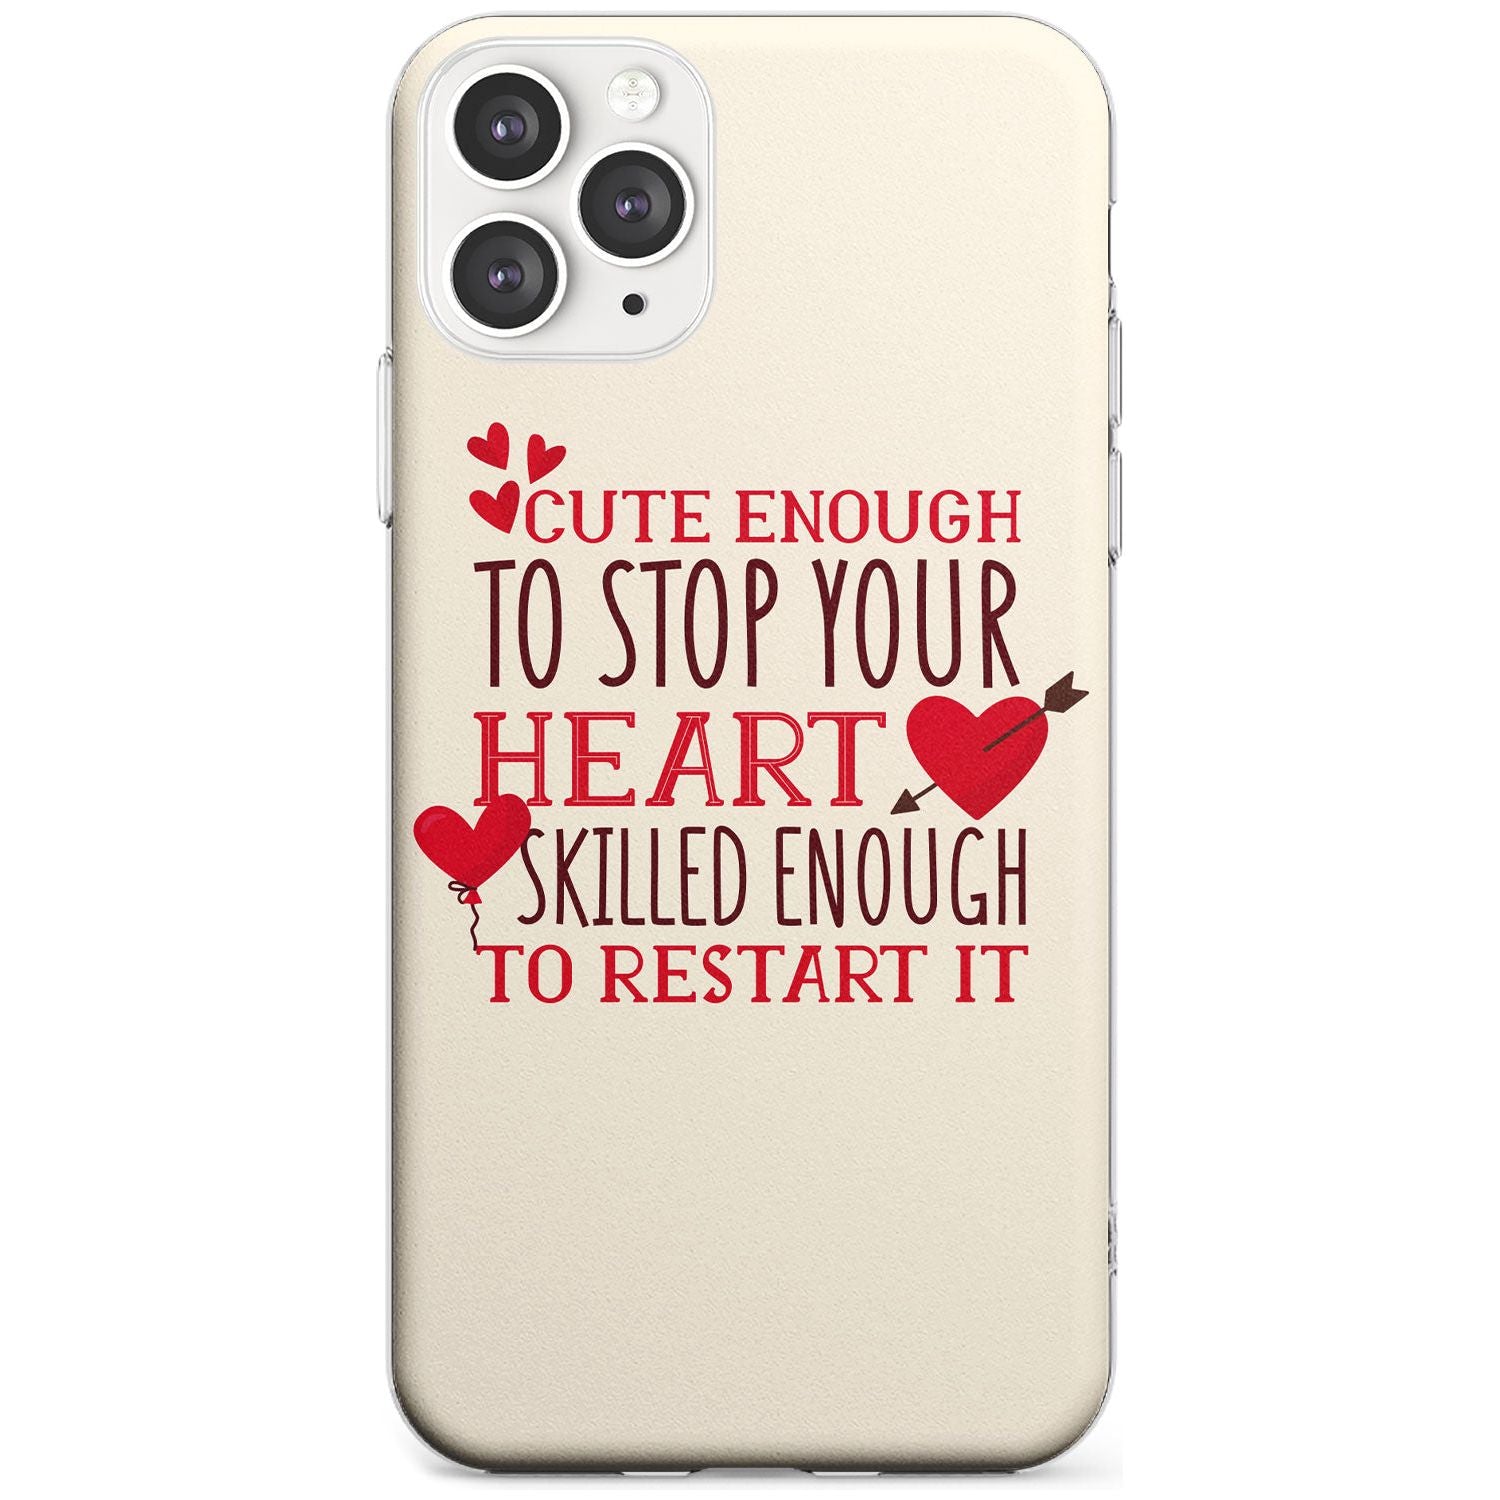 Medical Design Cute Enough to Stop Your Heart Slim TPU Phone Case for iPhone 11 Pro Max